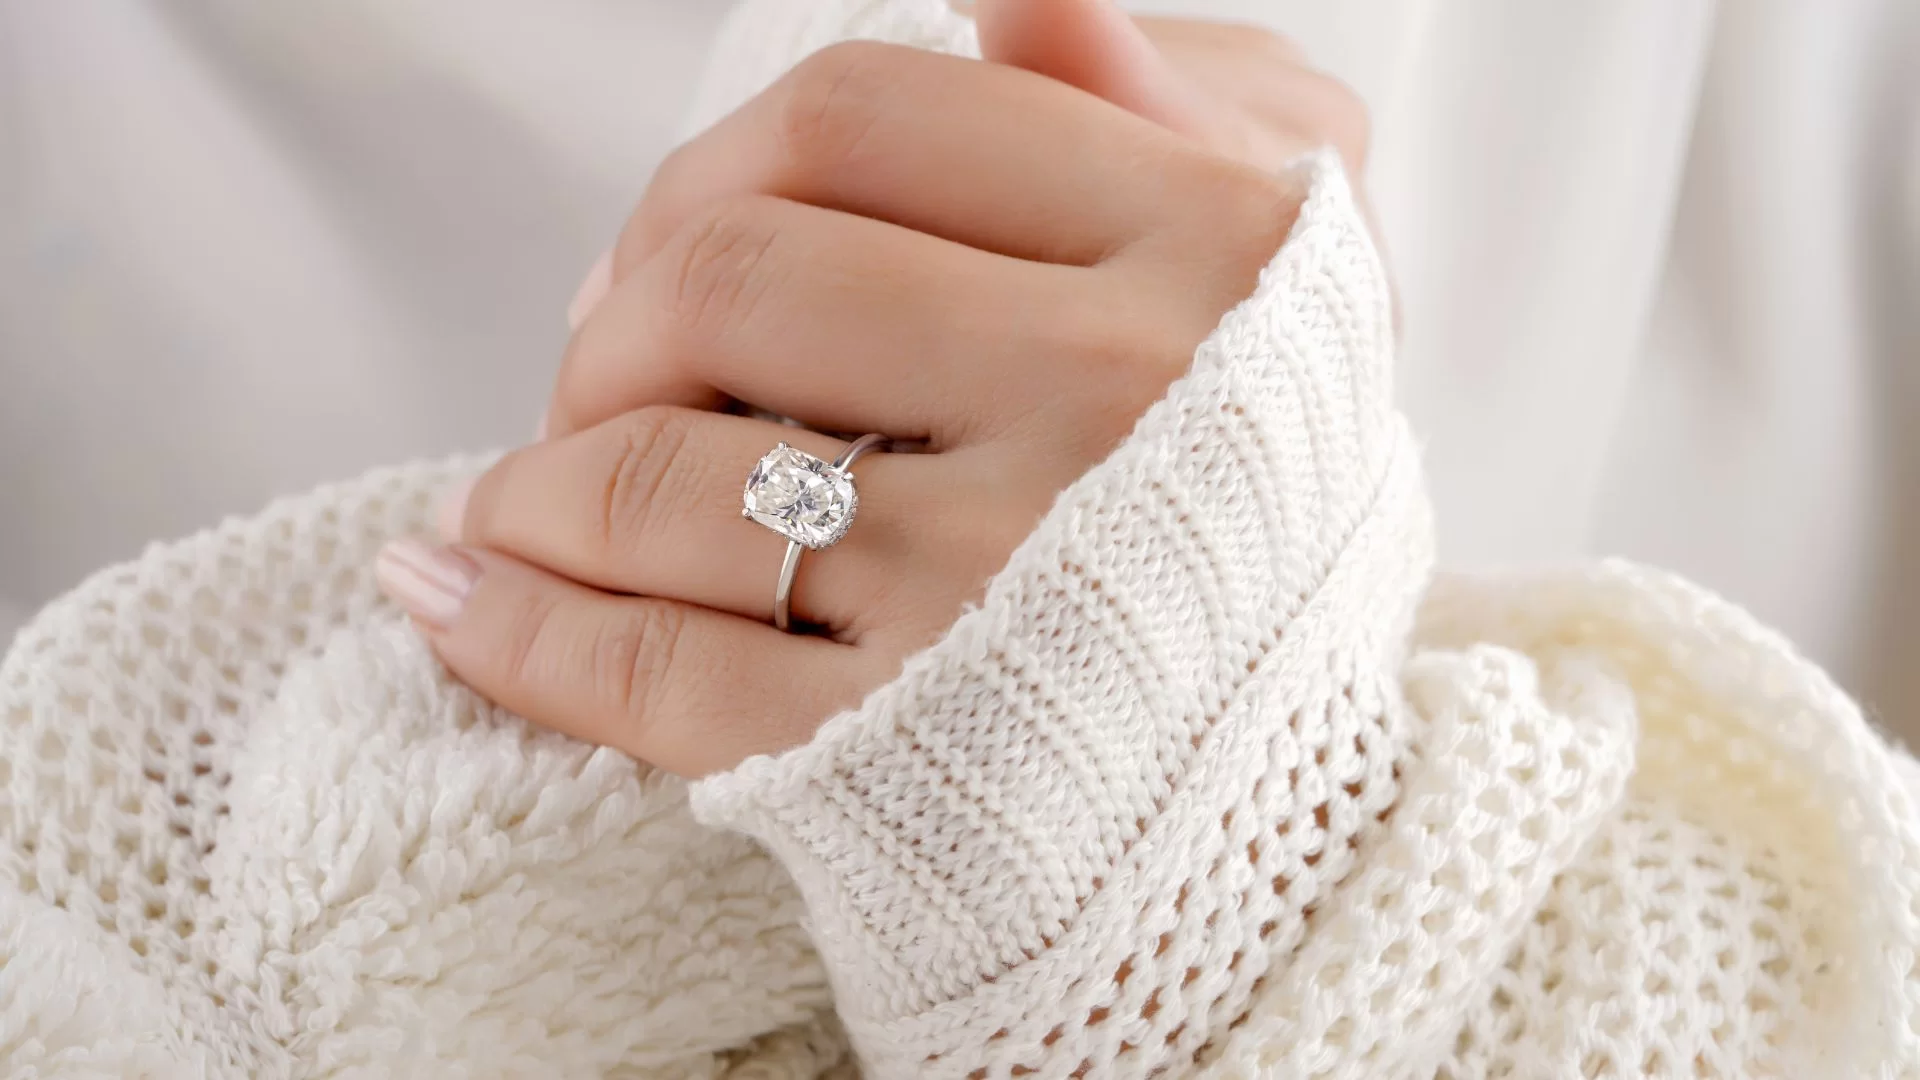 How to Select an Engagement Ring Based on Your Partner’s Hobbies